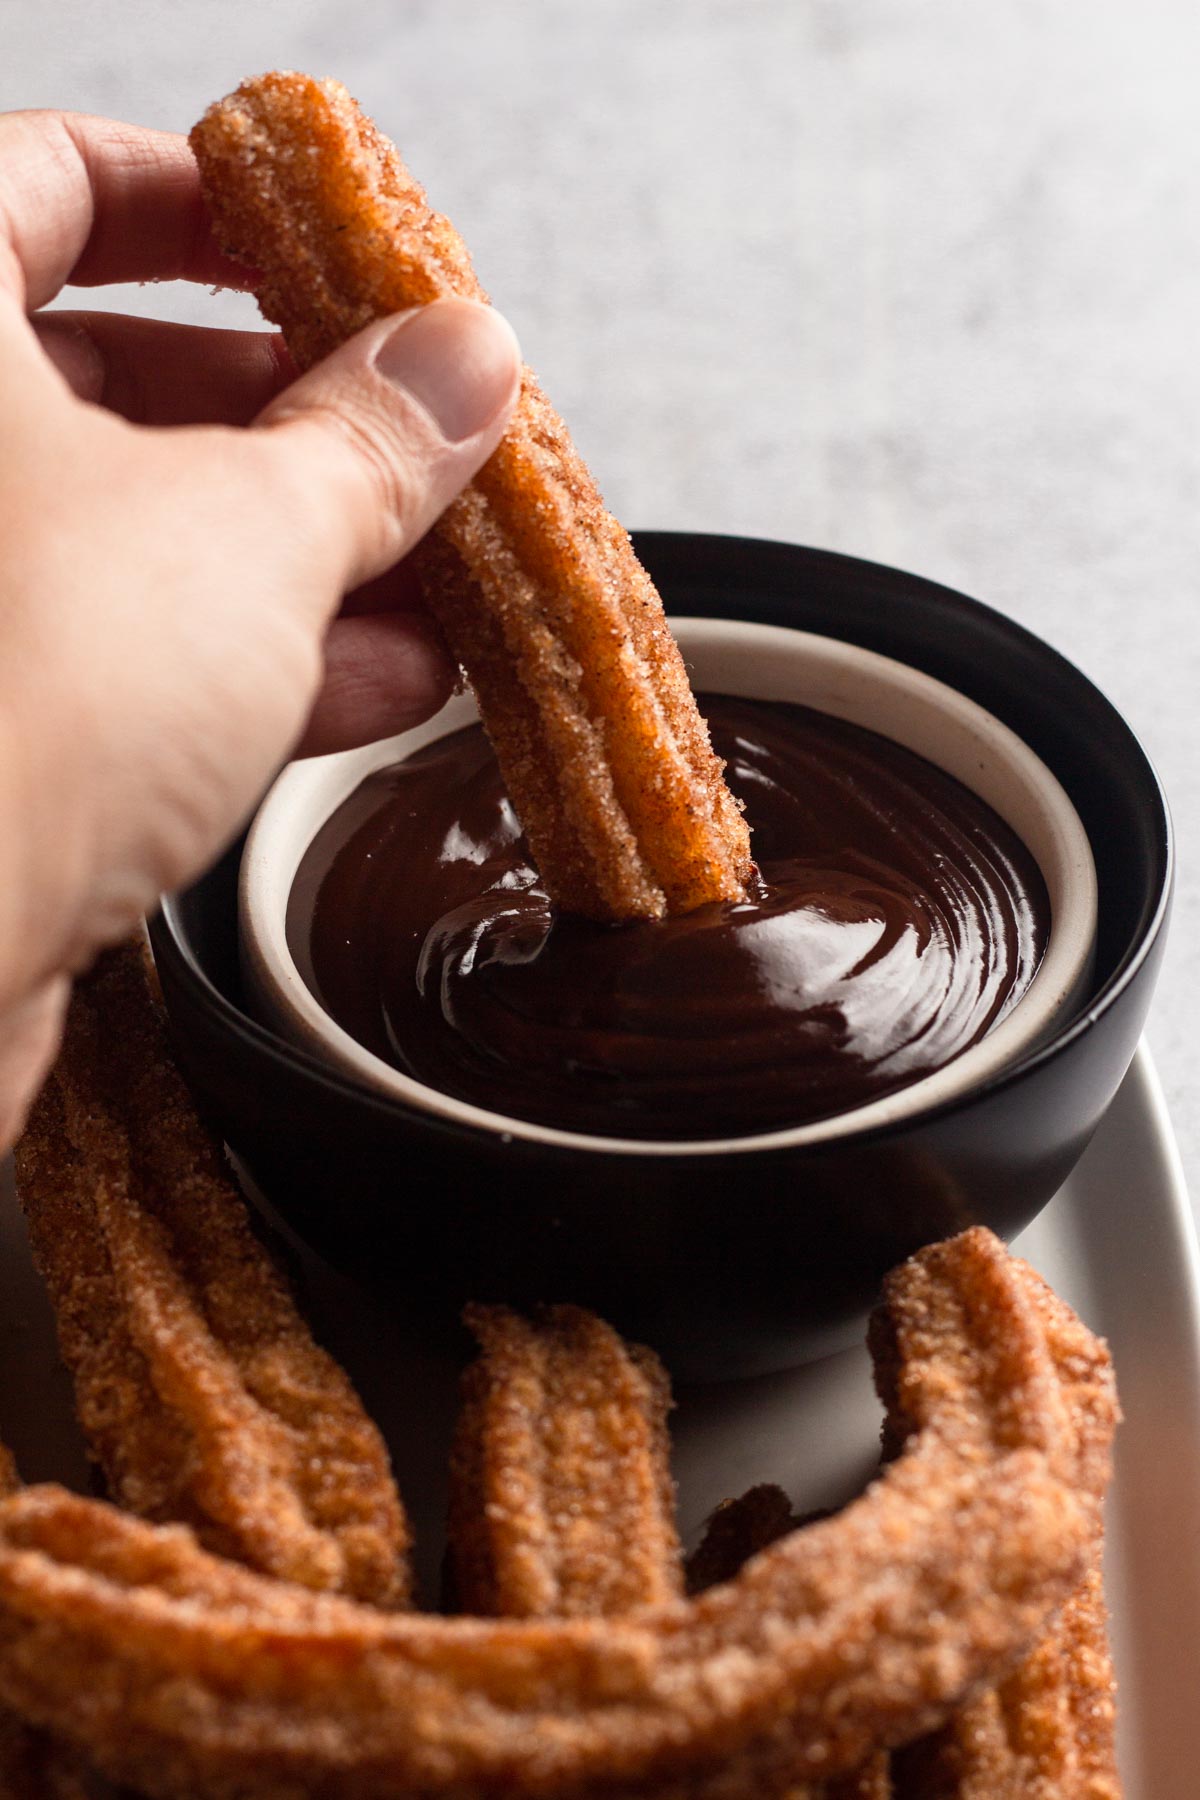 Angled view of a hand dipping a churro into a bowl of chocolate ganache.